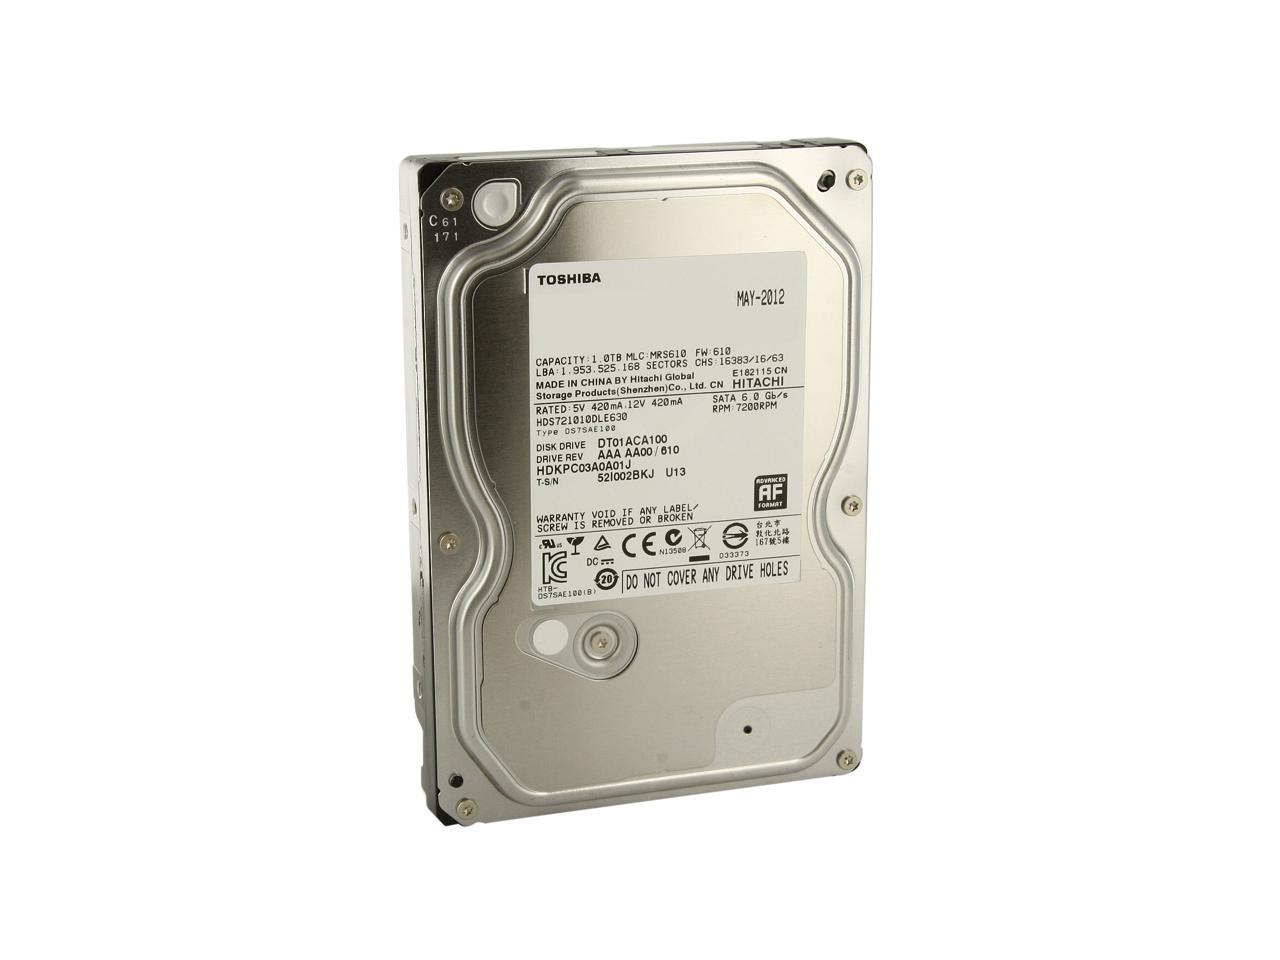 formatting a toshiba hard drive for mac and pc for big video files